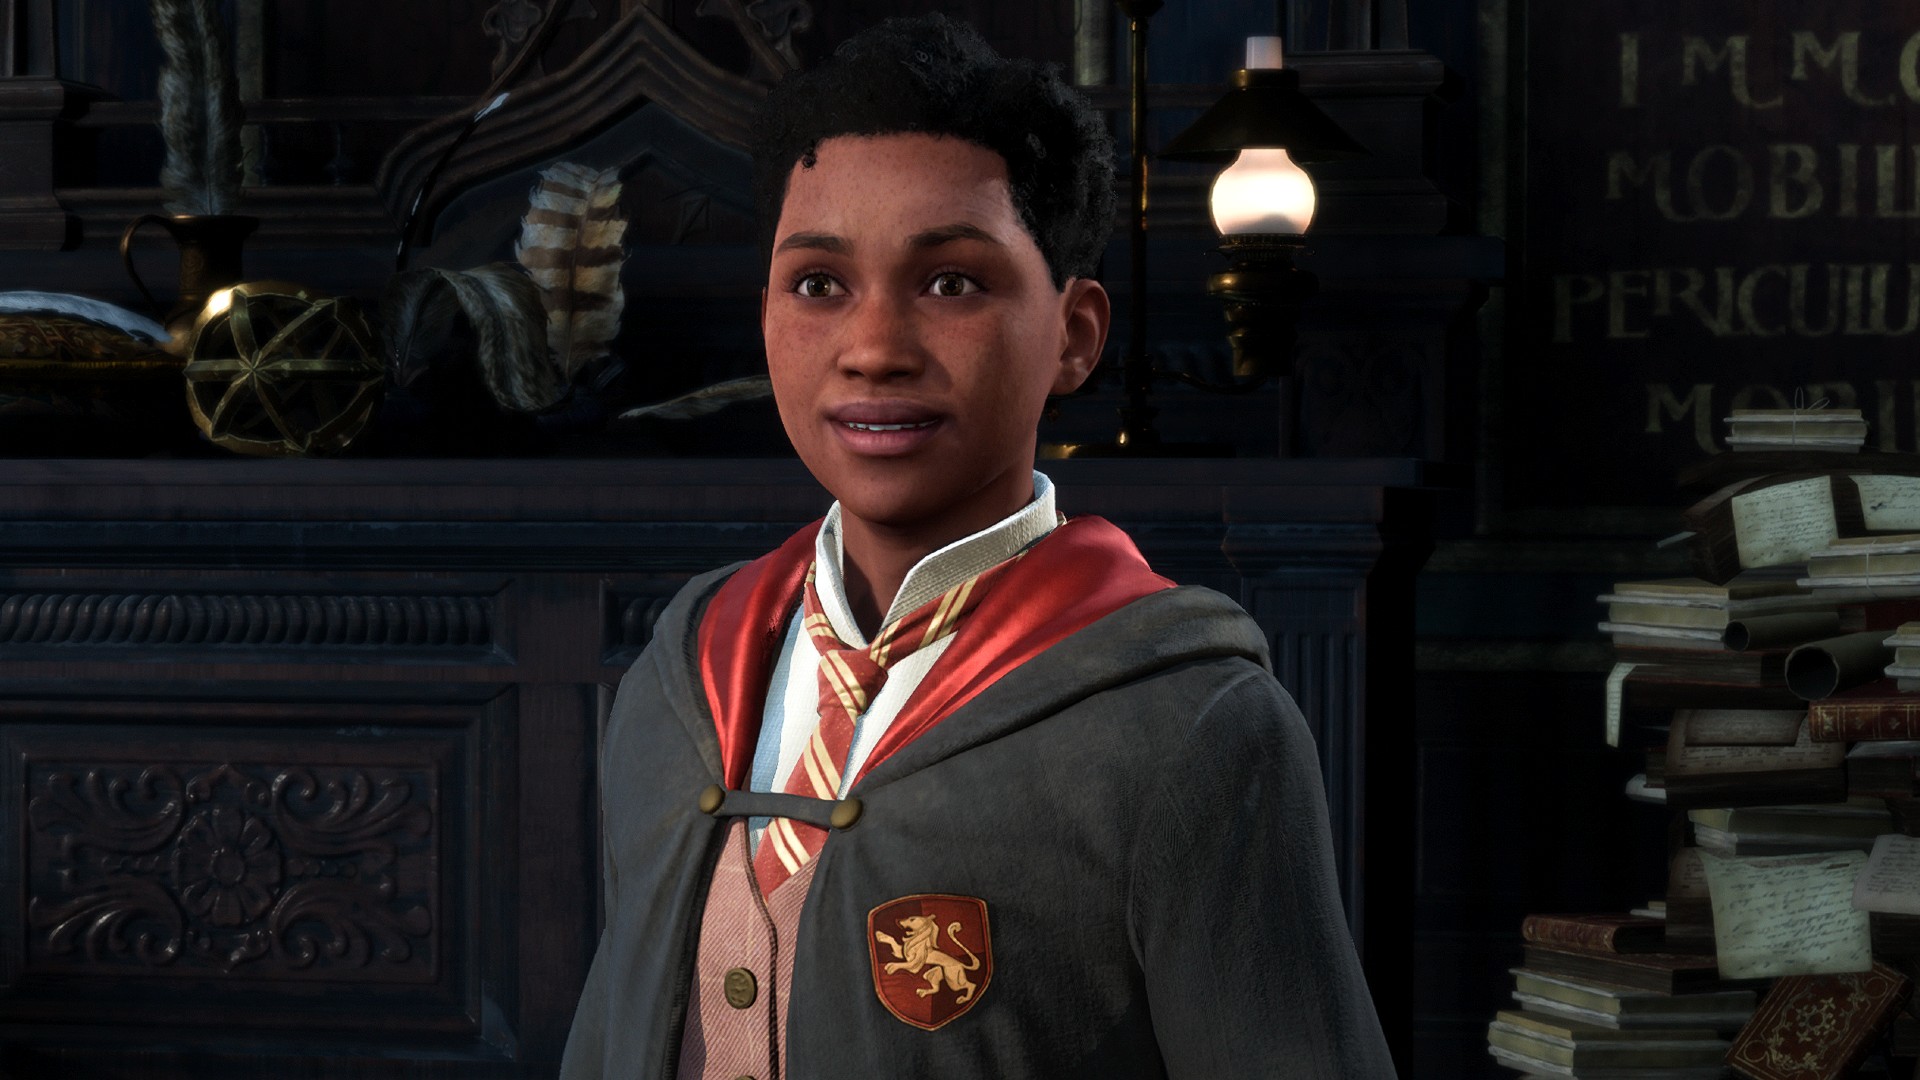 Hogwarts Legacy Review